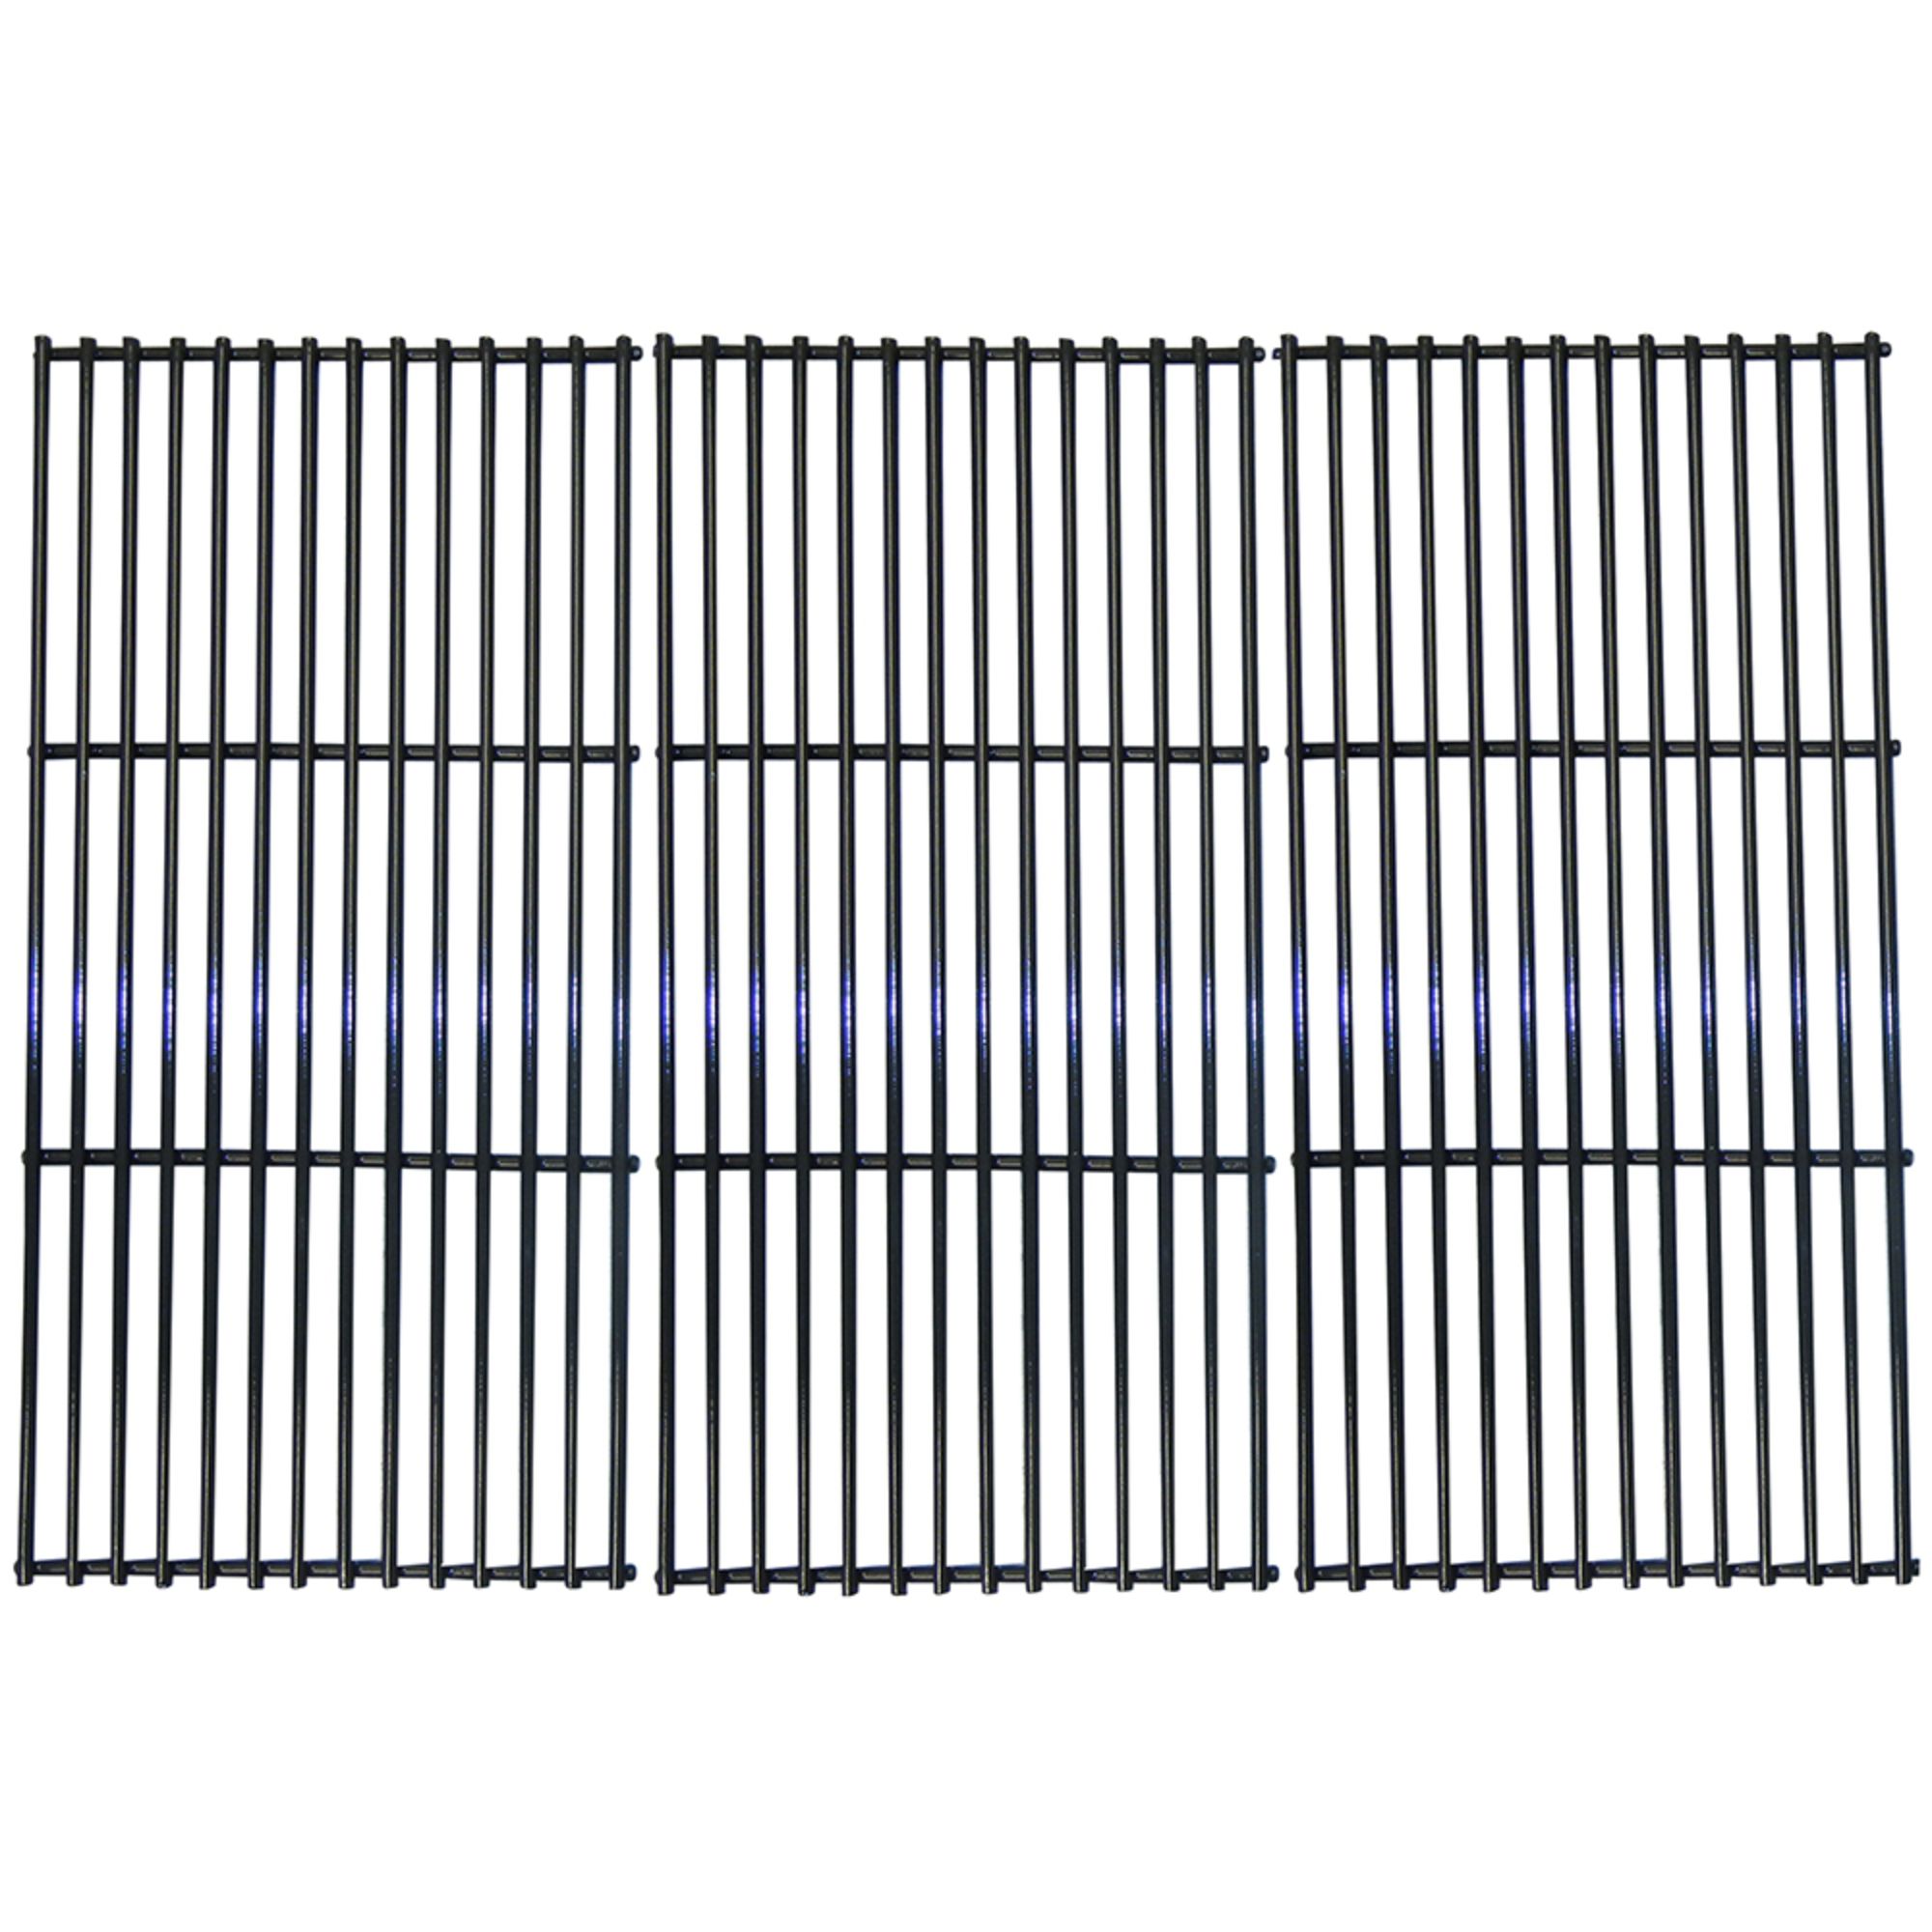 Porcelain steel wire cooking grid for Amana, Charbroil, Kenmore brand gas grills